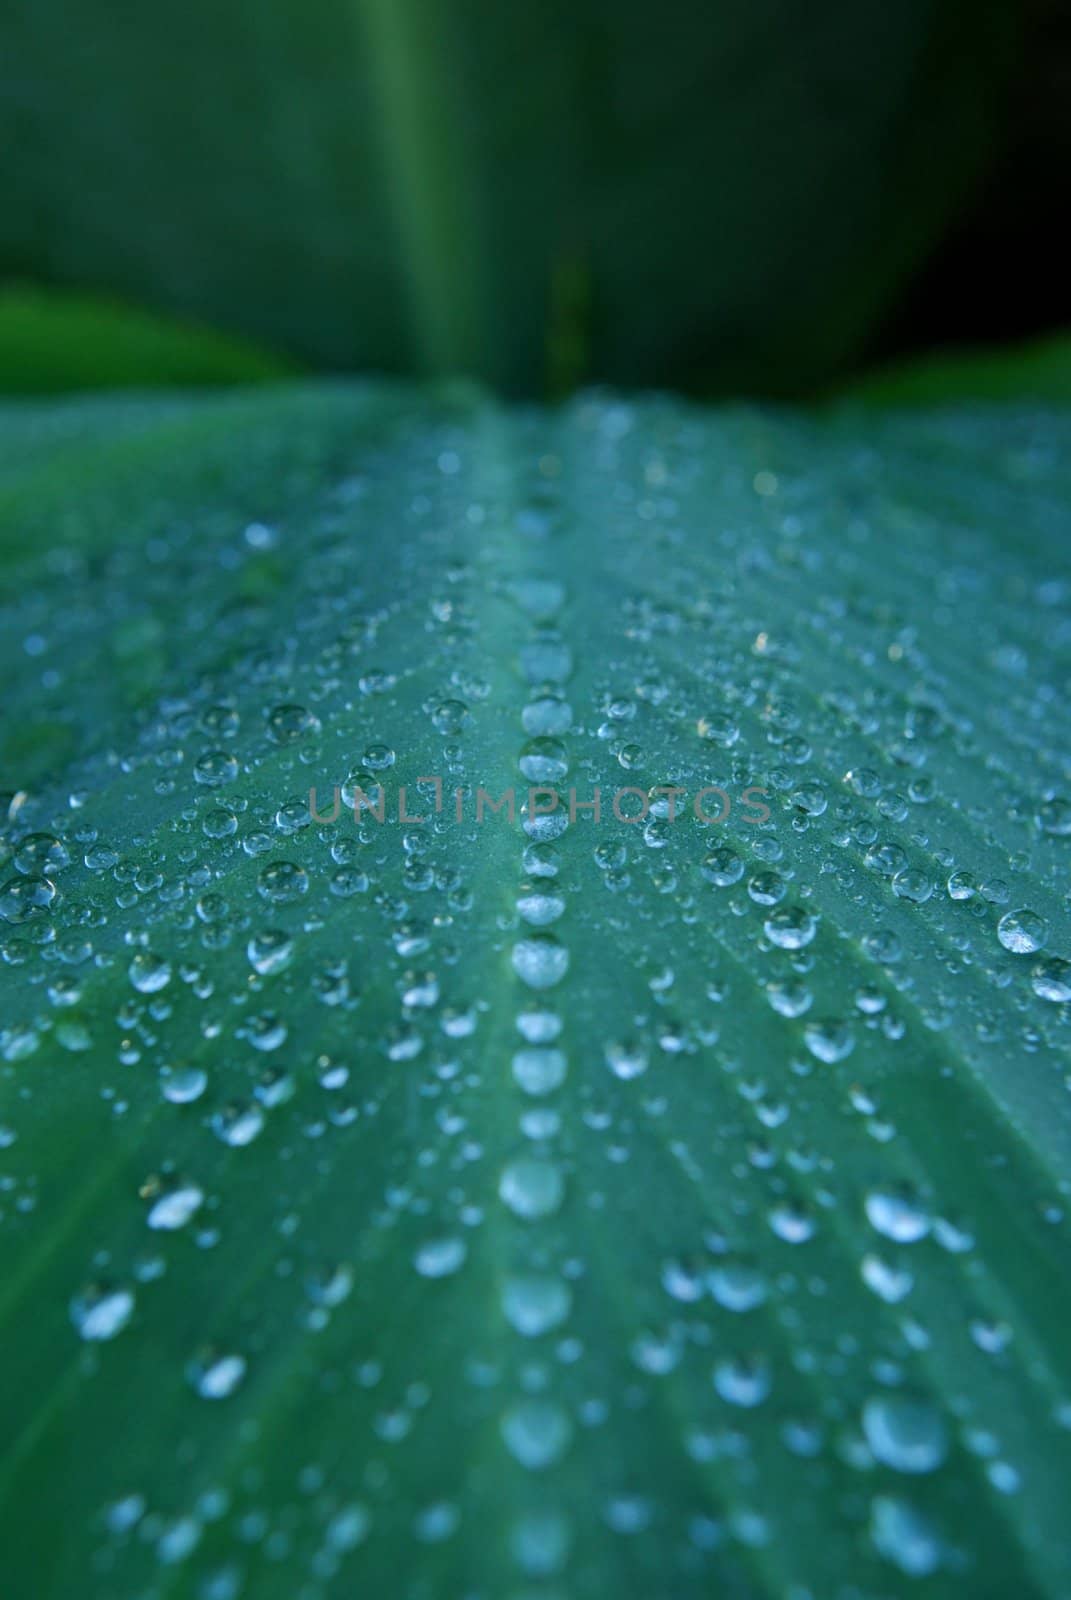 rain drops line up on a canalilly leaf